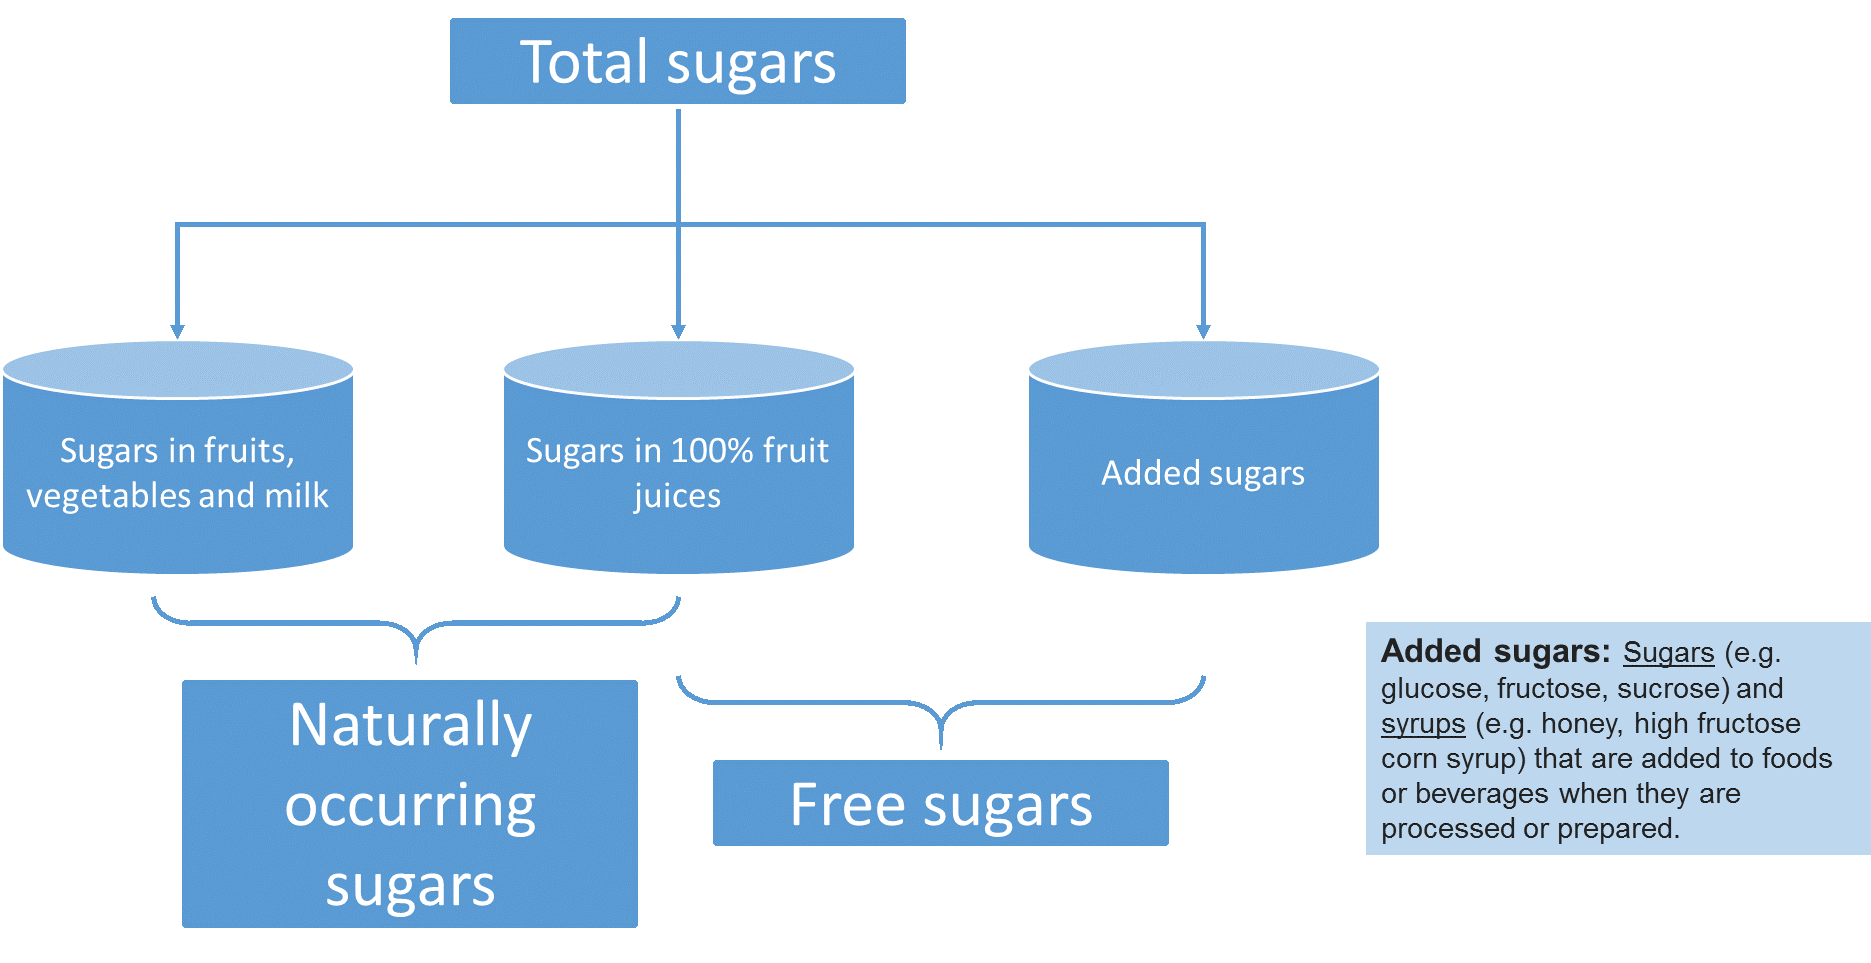 Total sugars includes naturally occurring sugars, added sugars; free sugars includes added sugars and sugars in 100%25 fruit juice